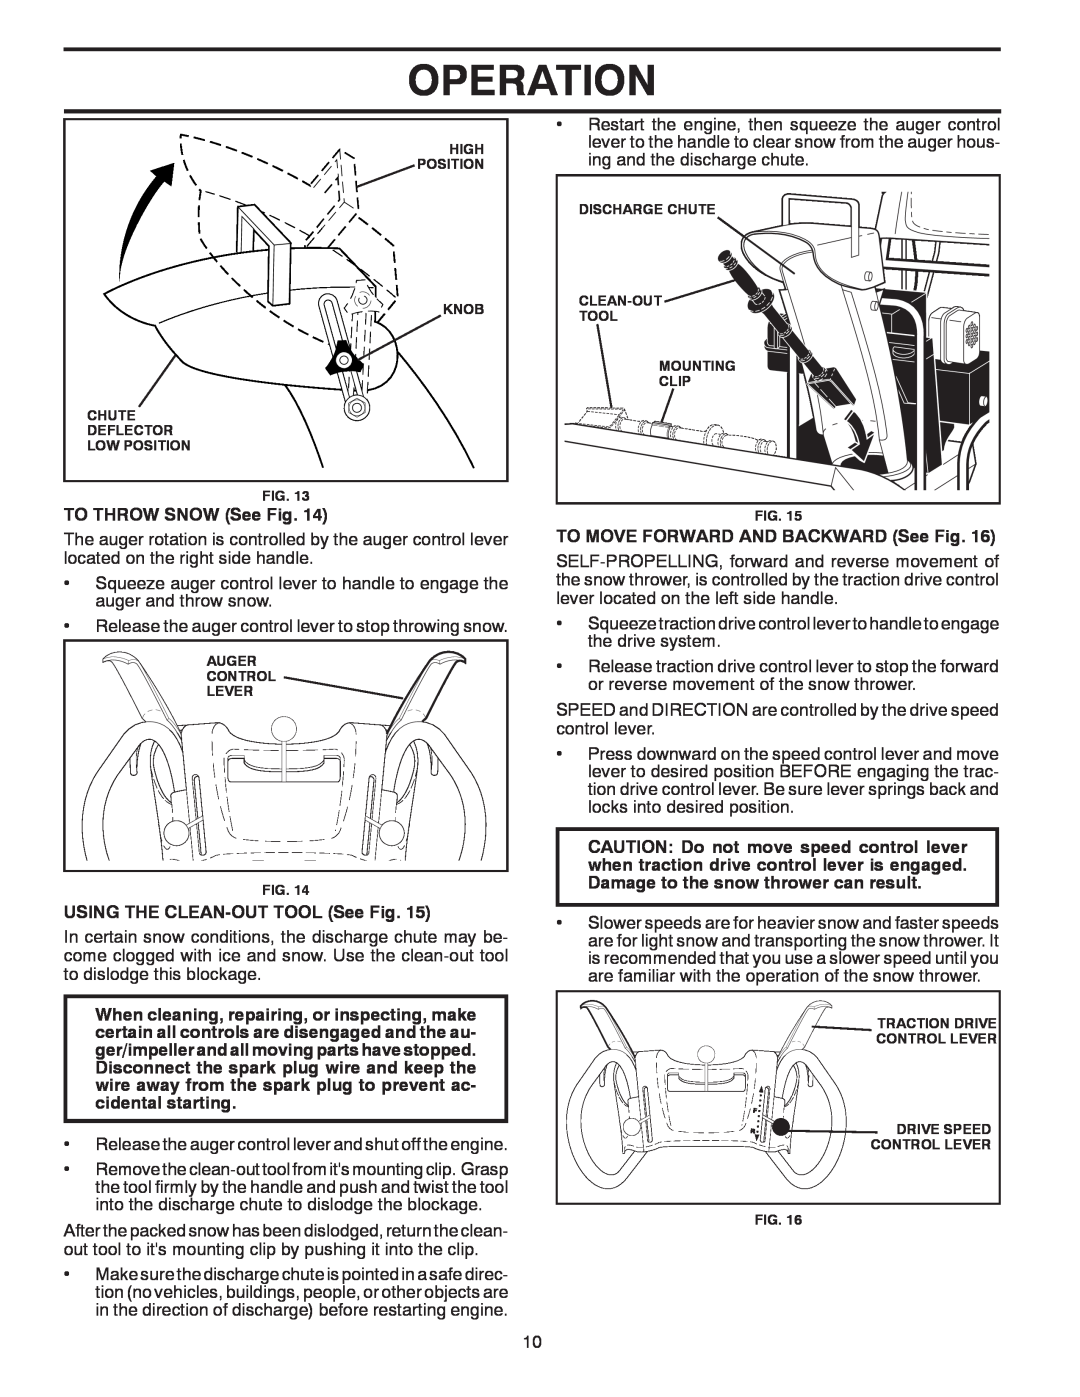 Poulan 96192002301, 422073 owner manual Operation, TO THROW SNOW See Fig, USING THE CLEAN-OUT TOOL See Fig 